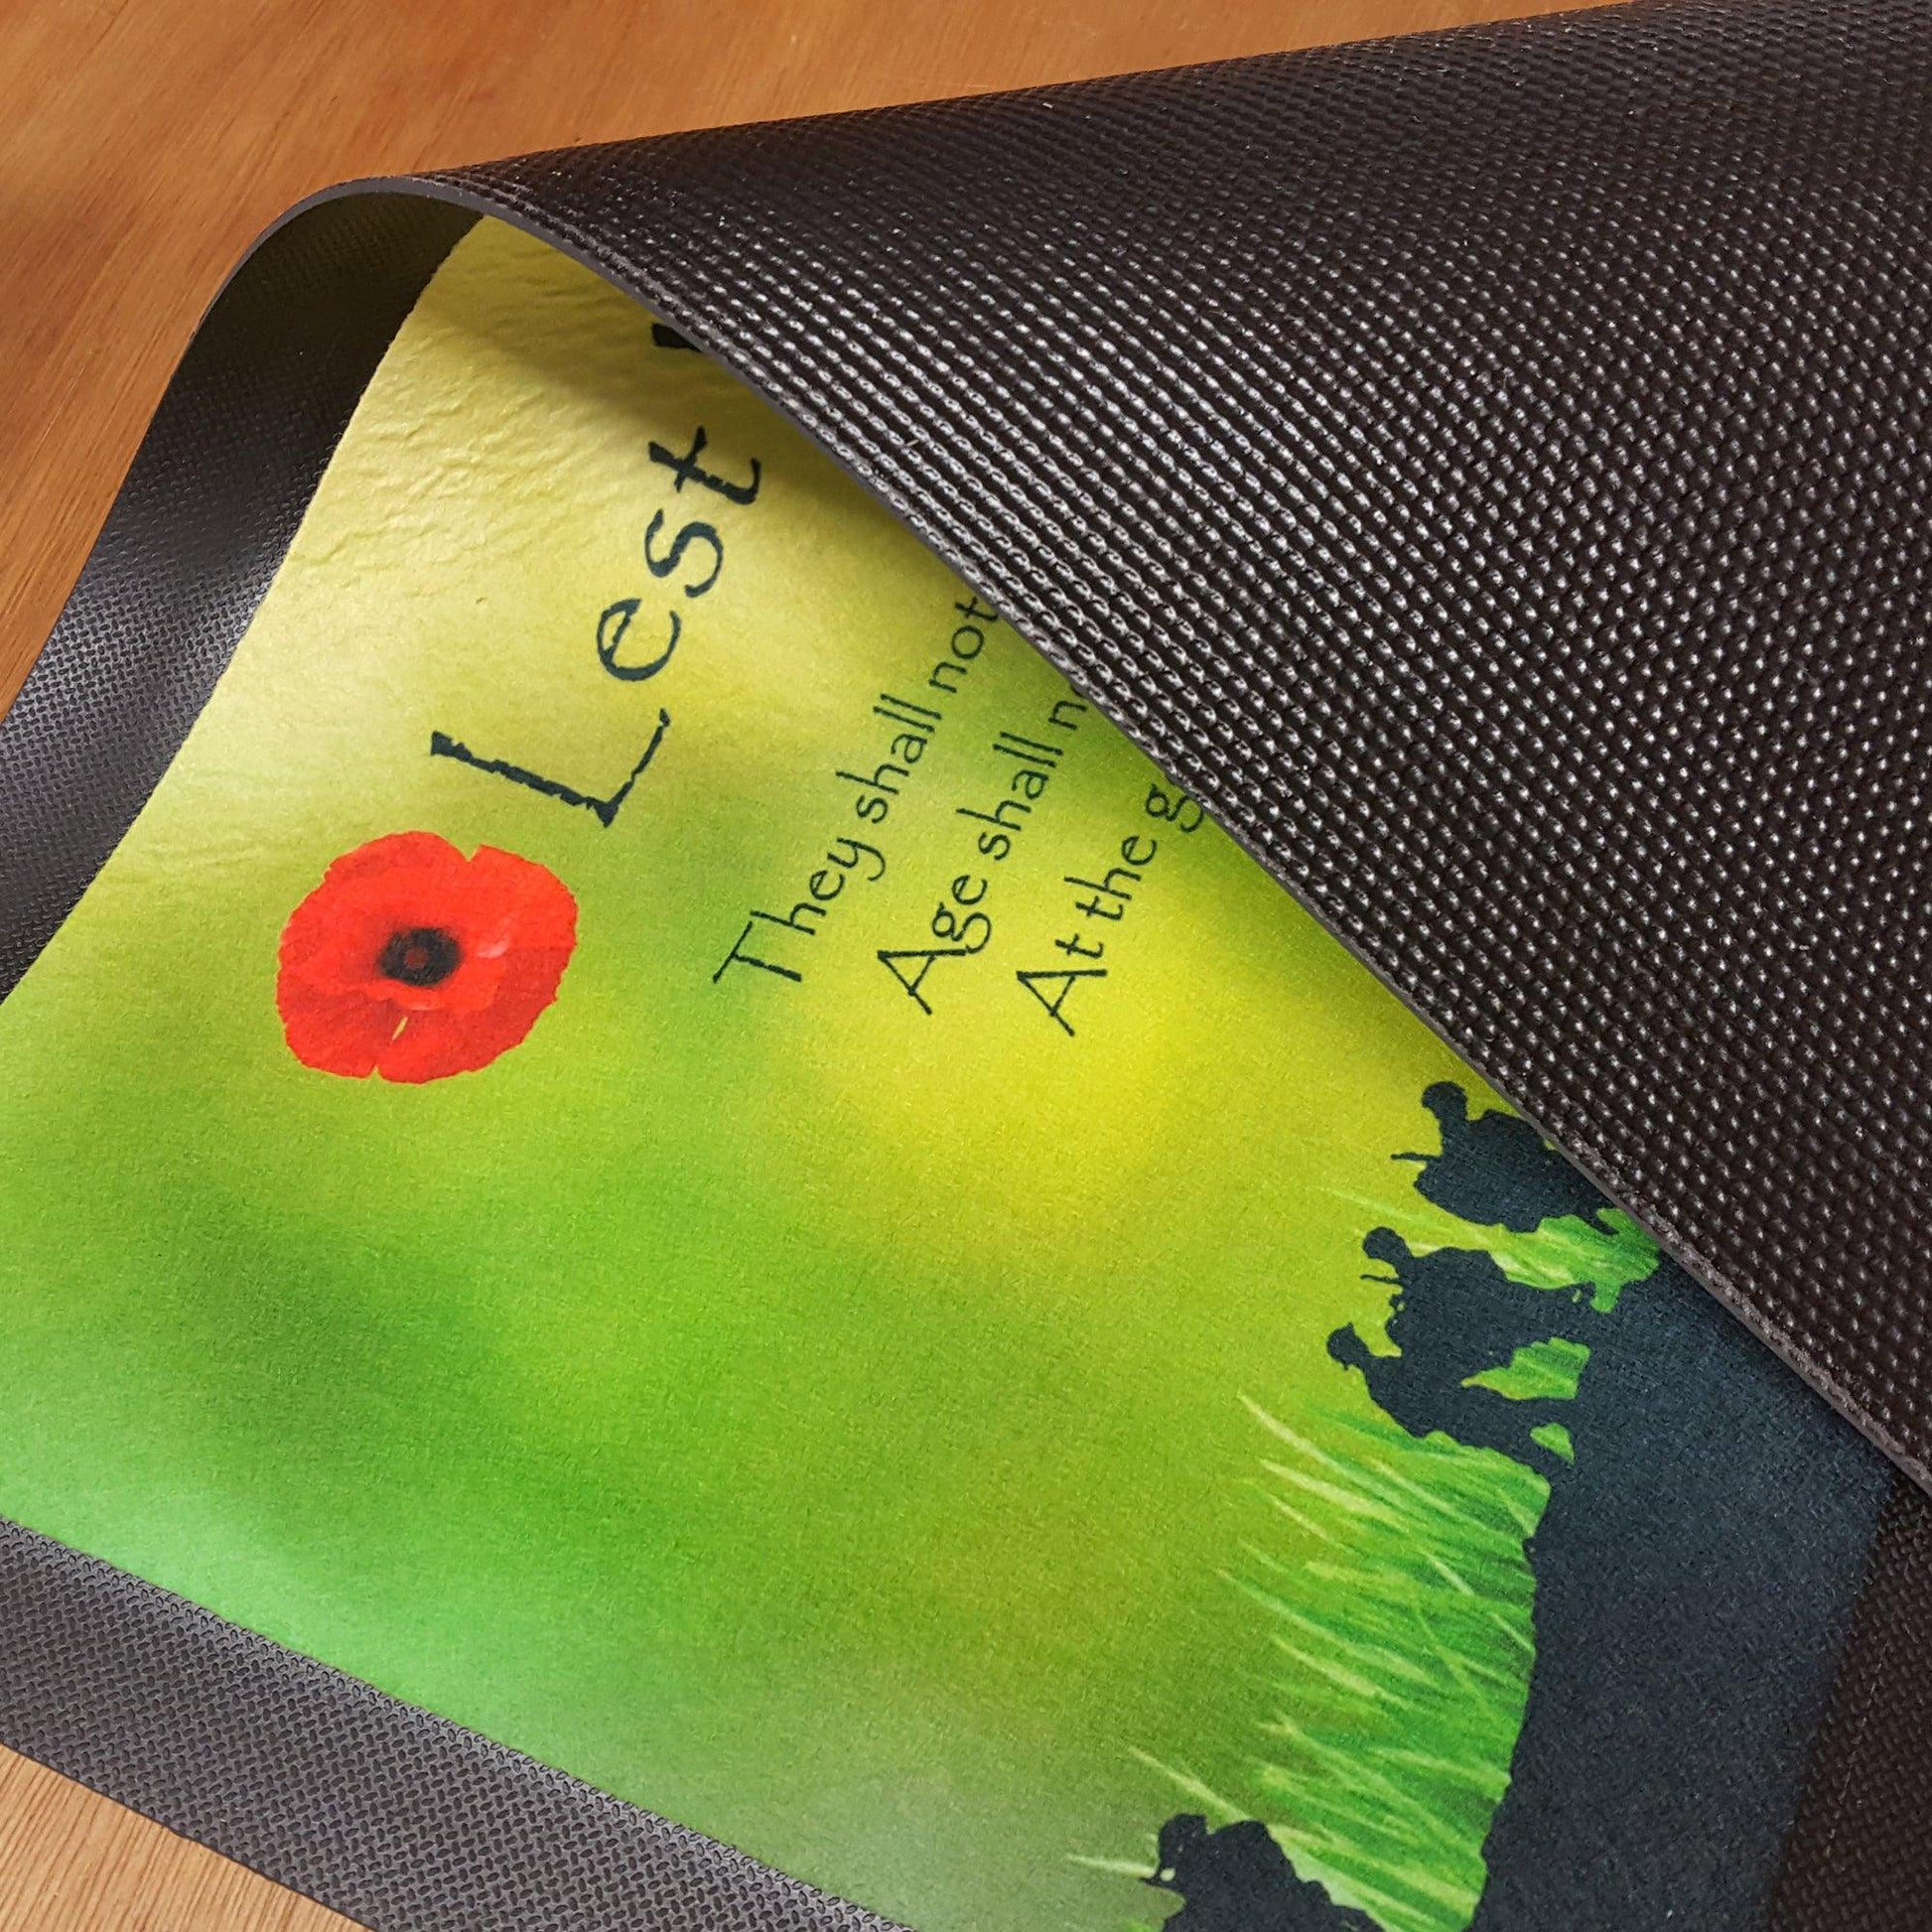 Personalised Bar Runner 44 x 25cm (17.3 x 9.8") Bar Mat Lest We Forget Military Poppy Green Background - shopquality4u